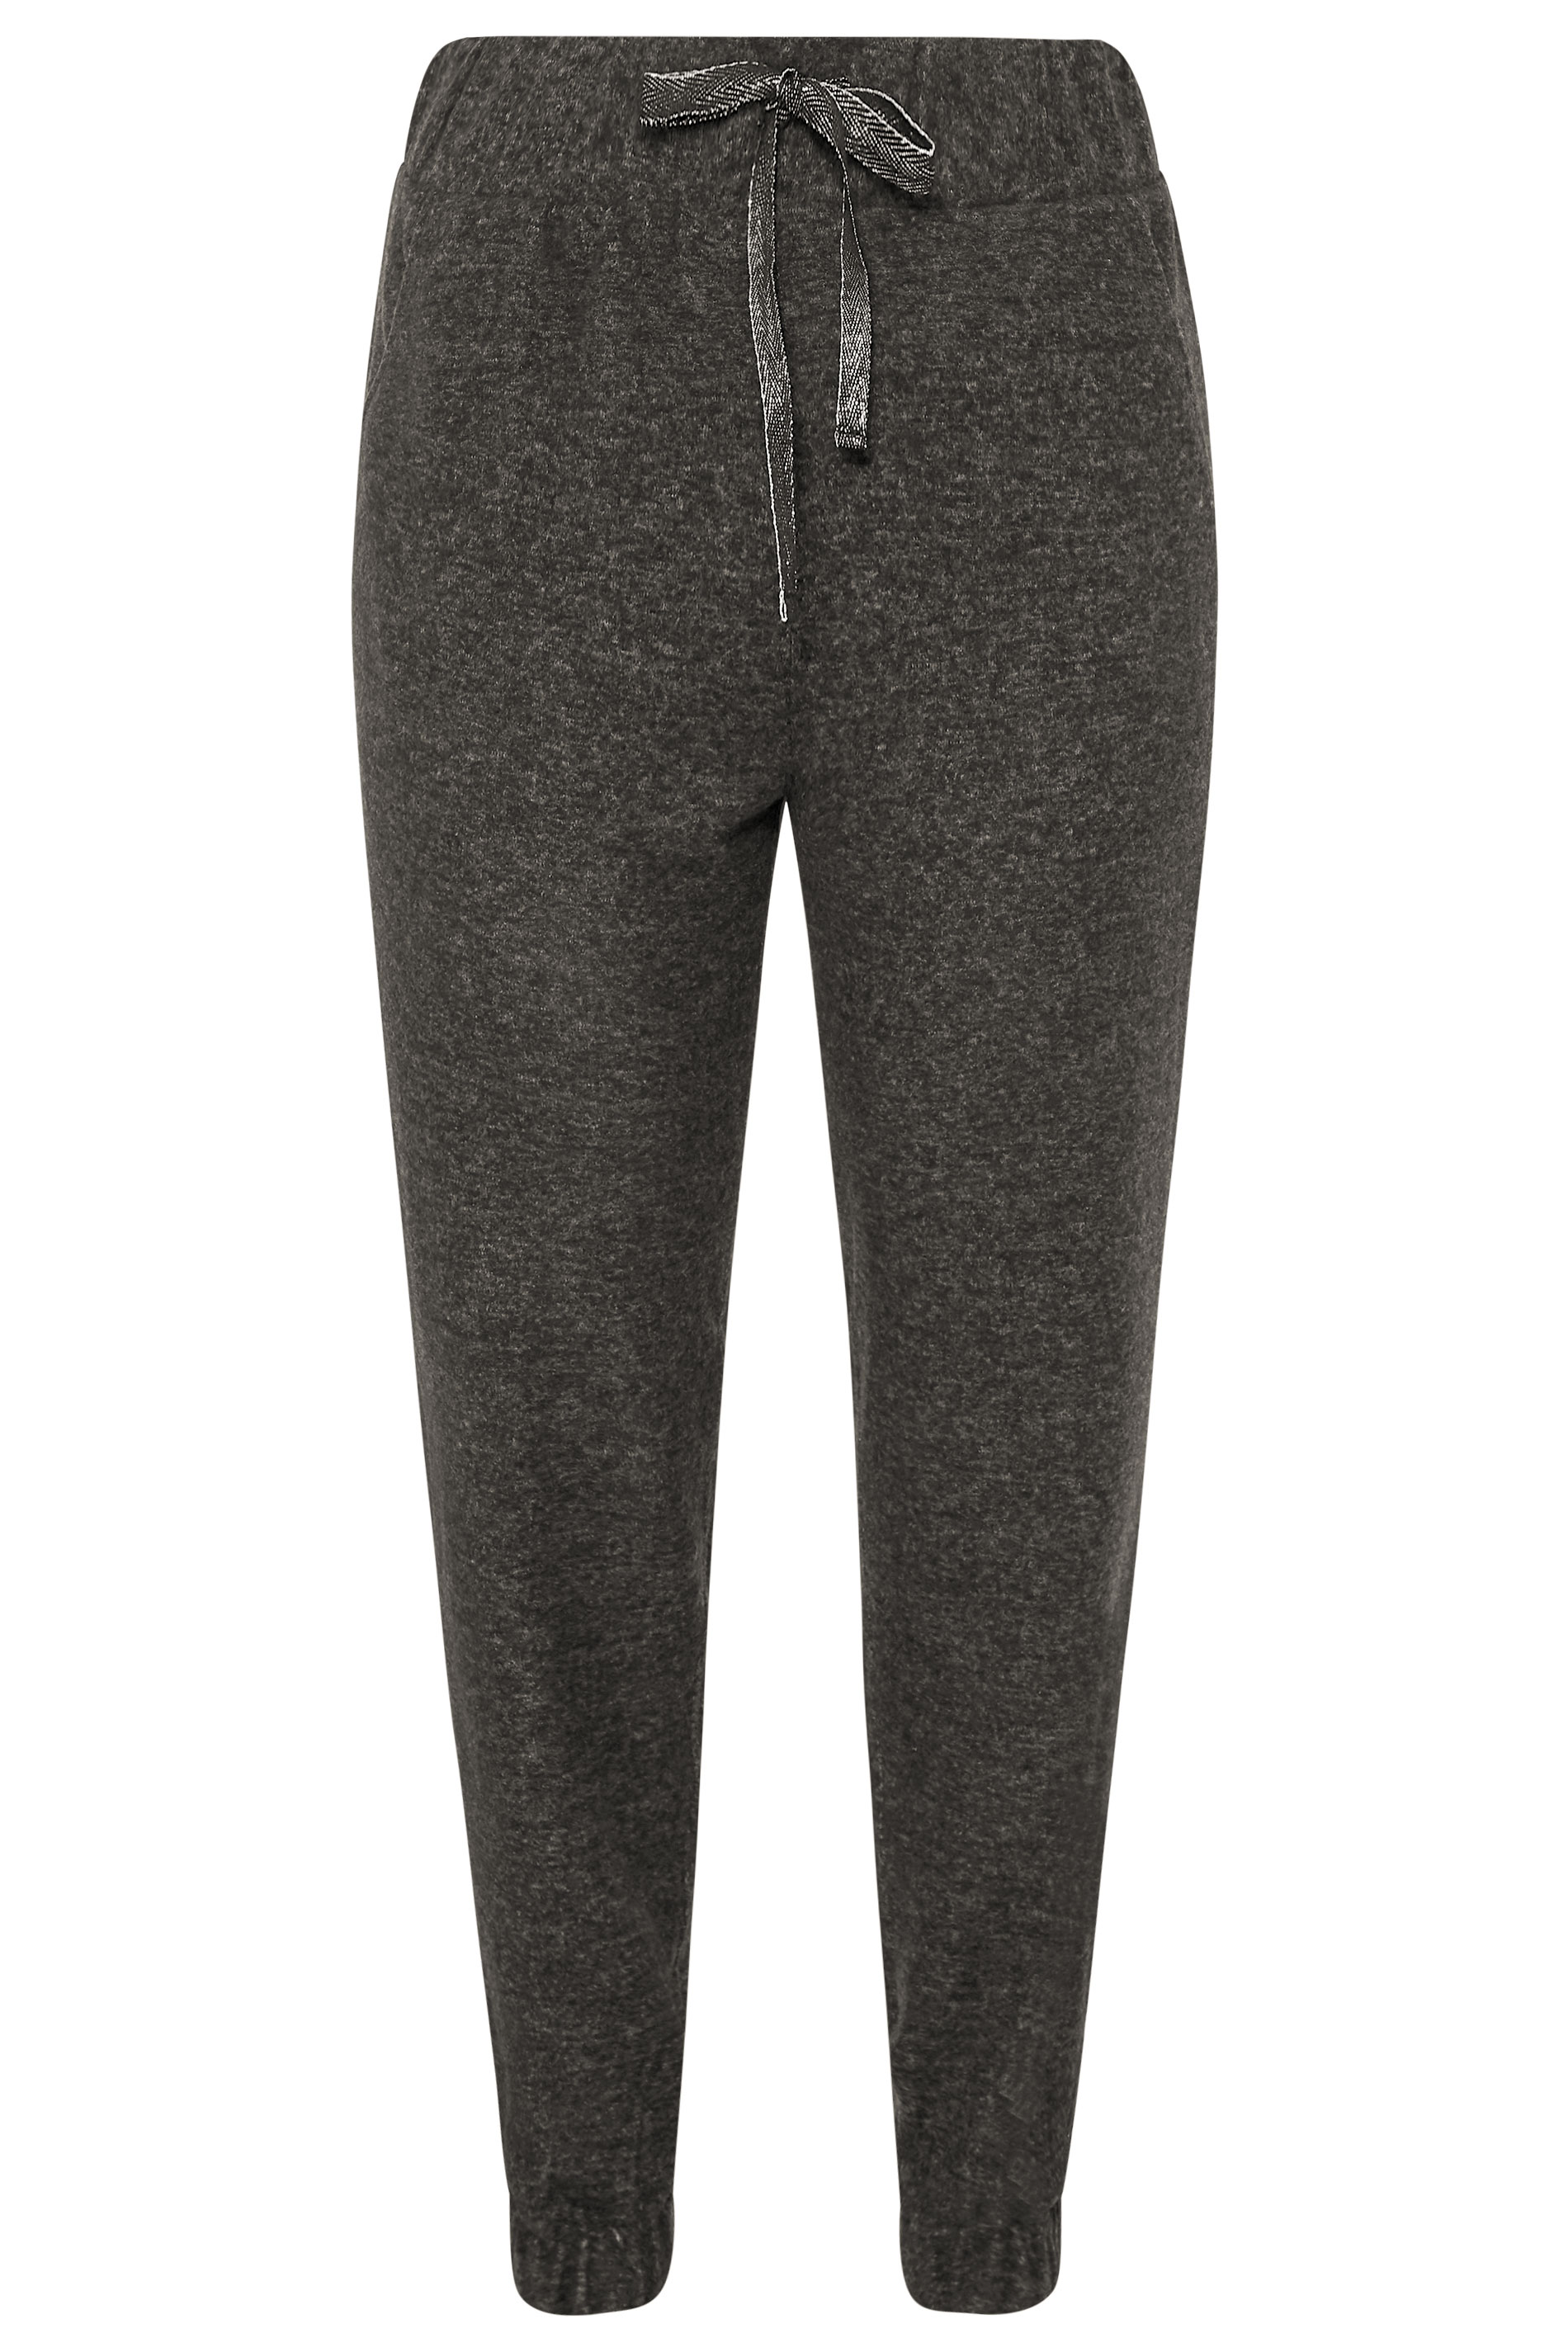 Charcoal Grey Marl Brushed Joggers | Yours Clothing